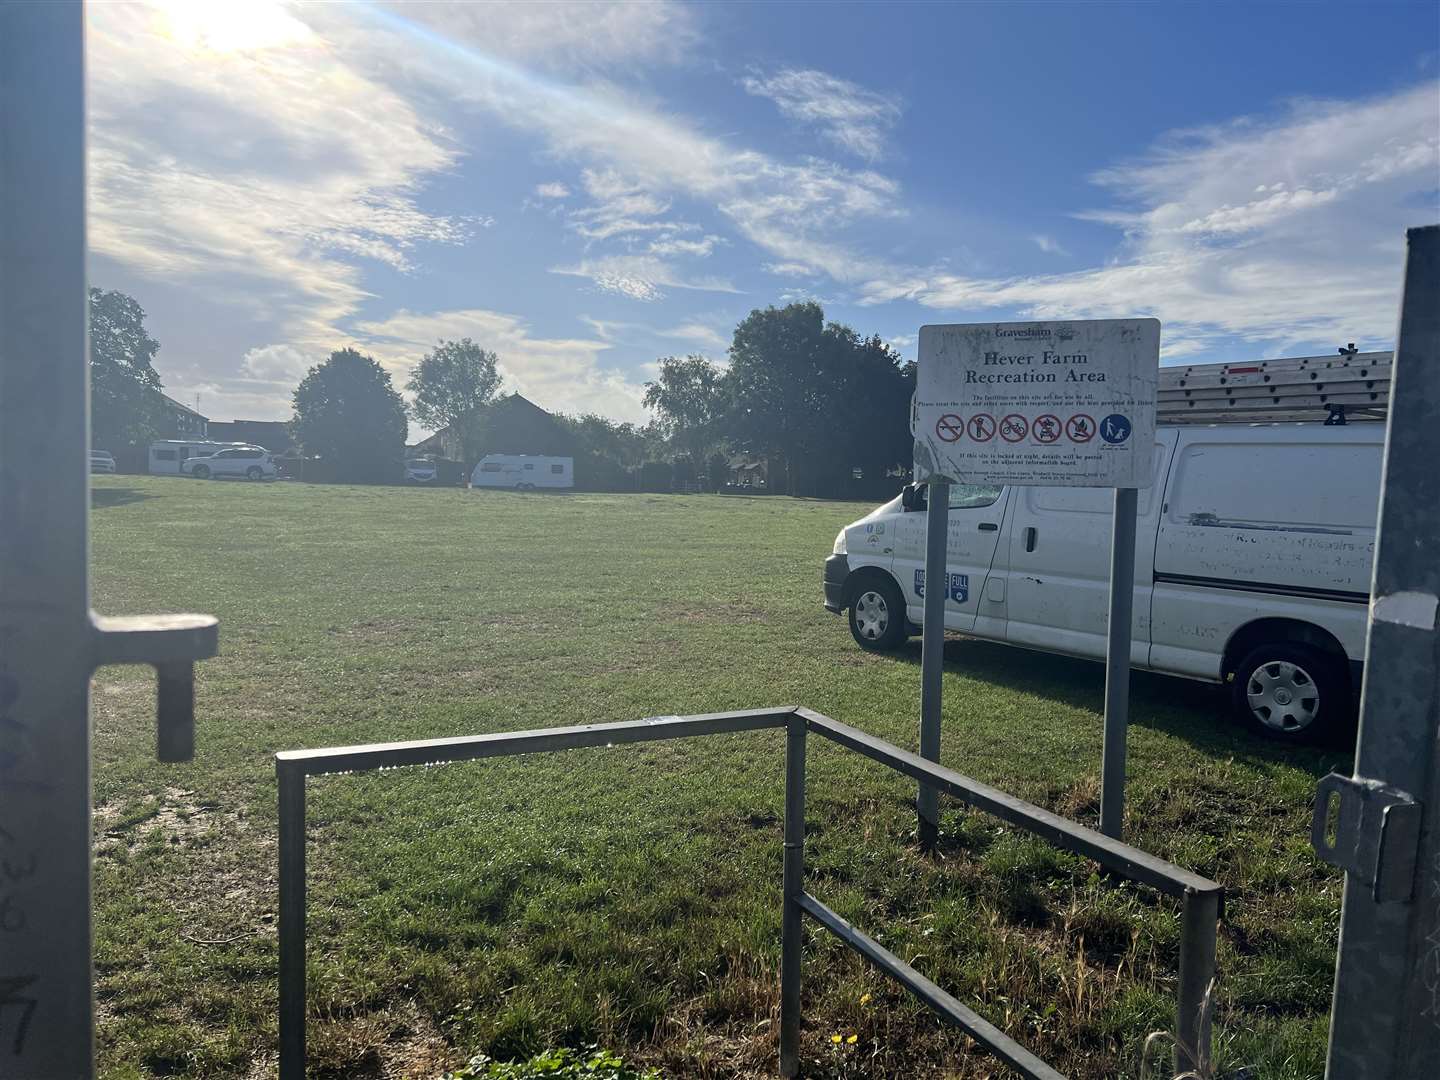 Travellers now have an encampment on Hever Farm recreational ground, Singlewell. Picture: Megan Carr